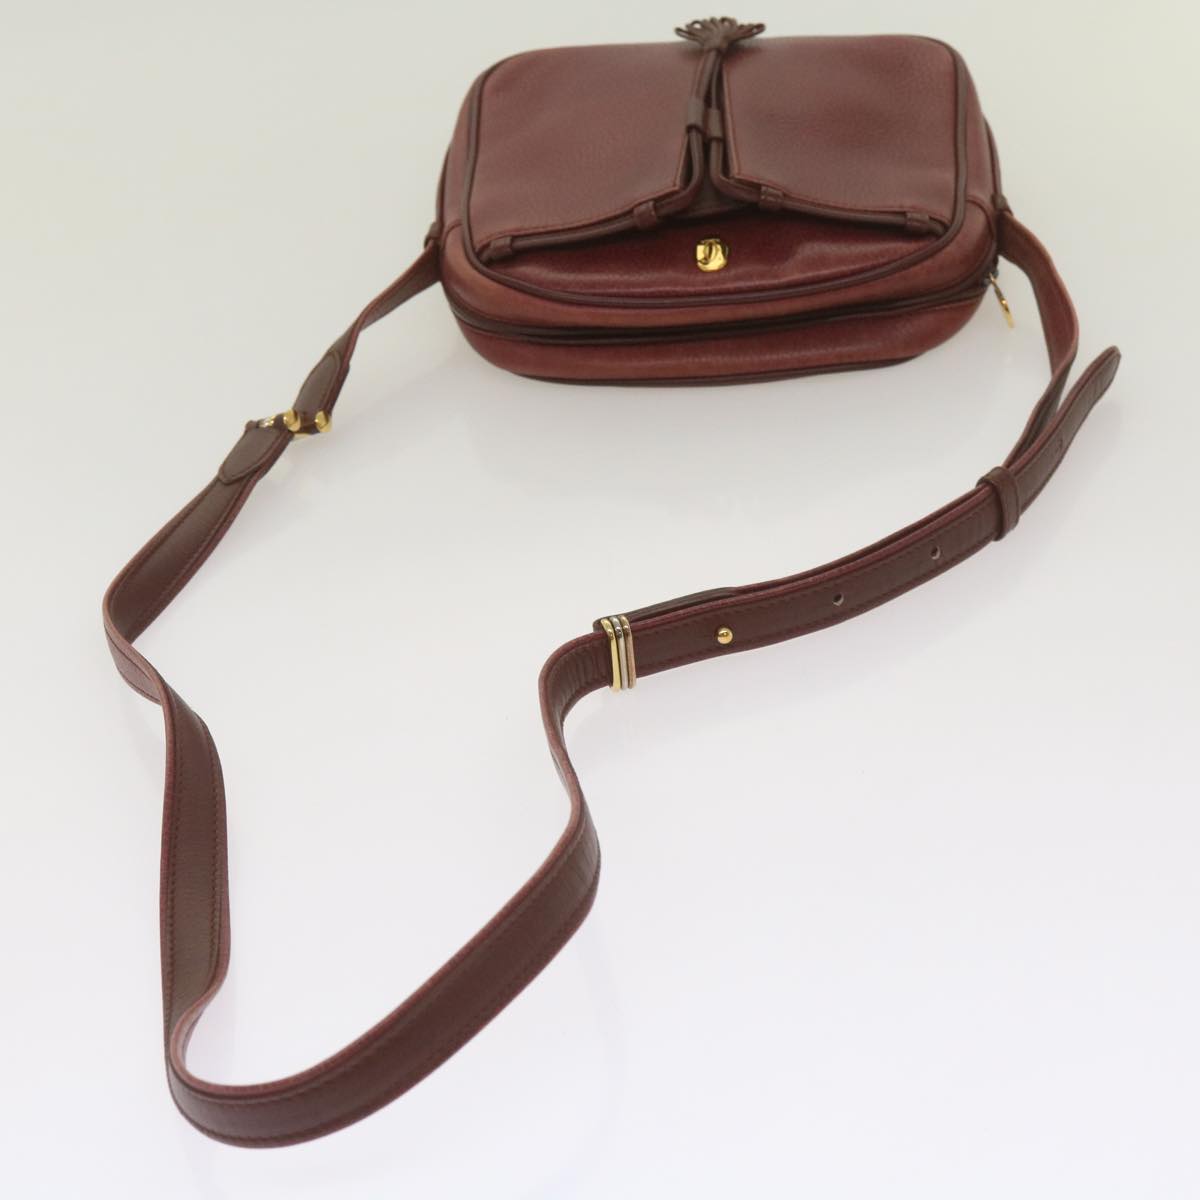 CARTIER Shoulder Bag Leather Wine Red Auth 68174